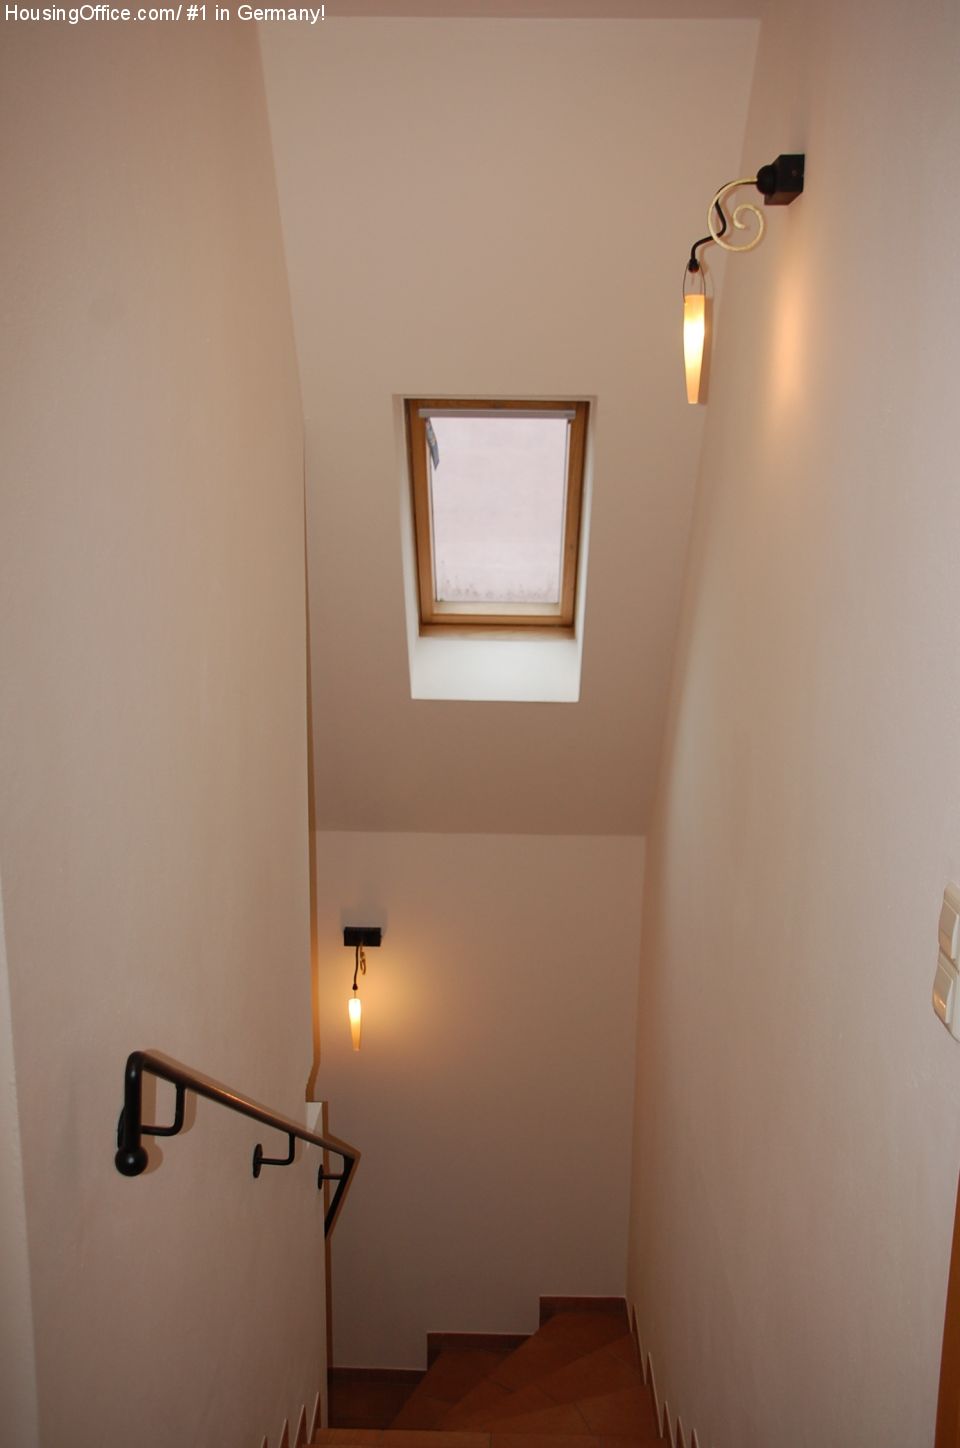 Stairs to the 2nd floor